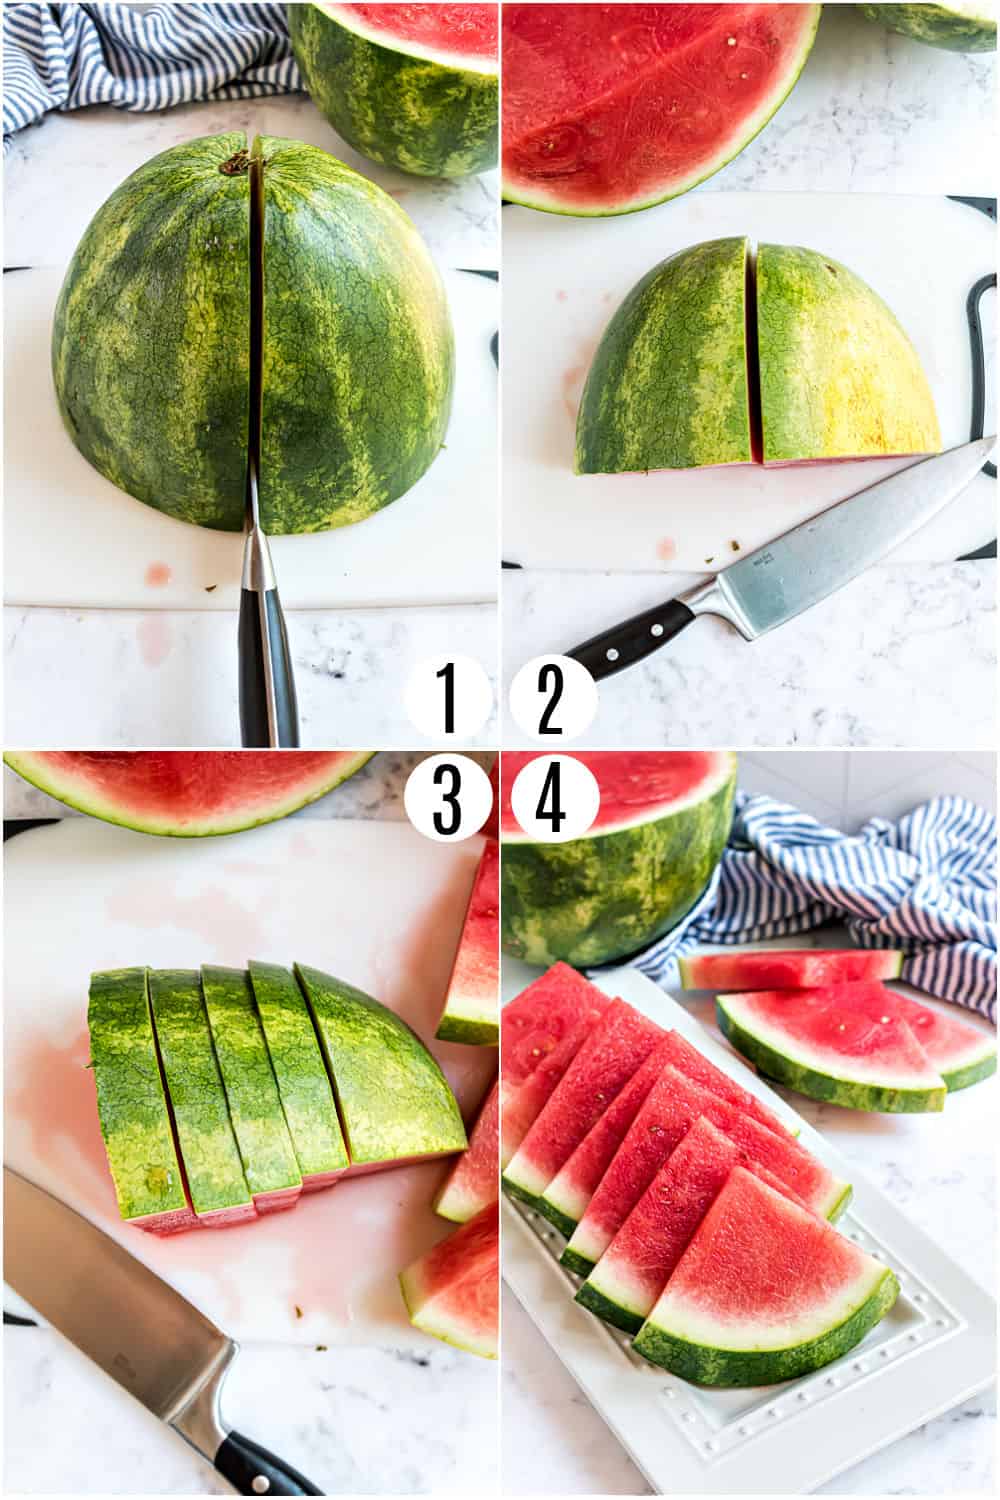 Step by step photos showing how to cut a watermelon into wedges.